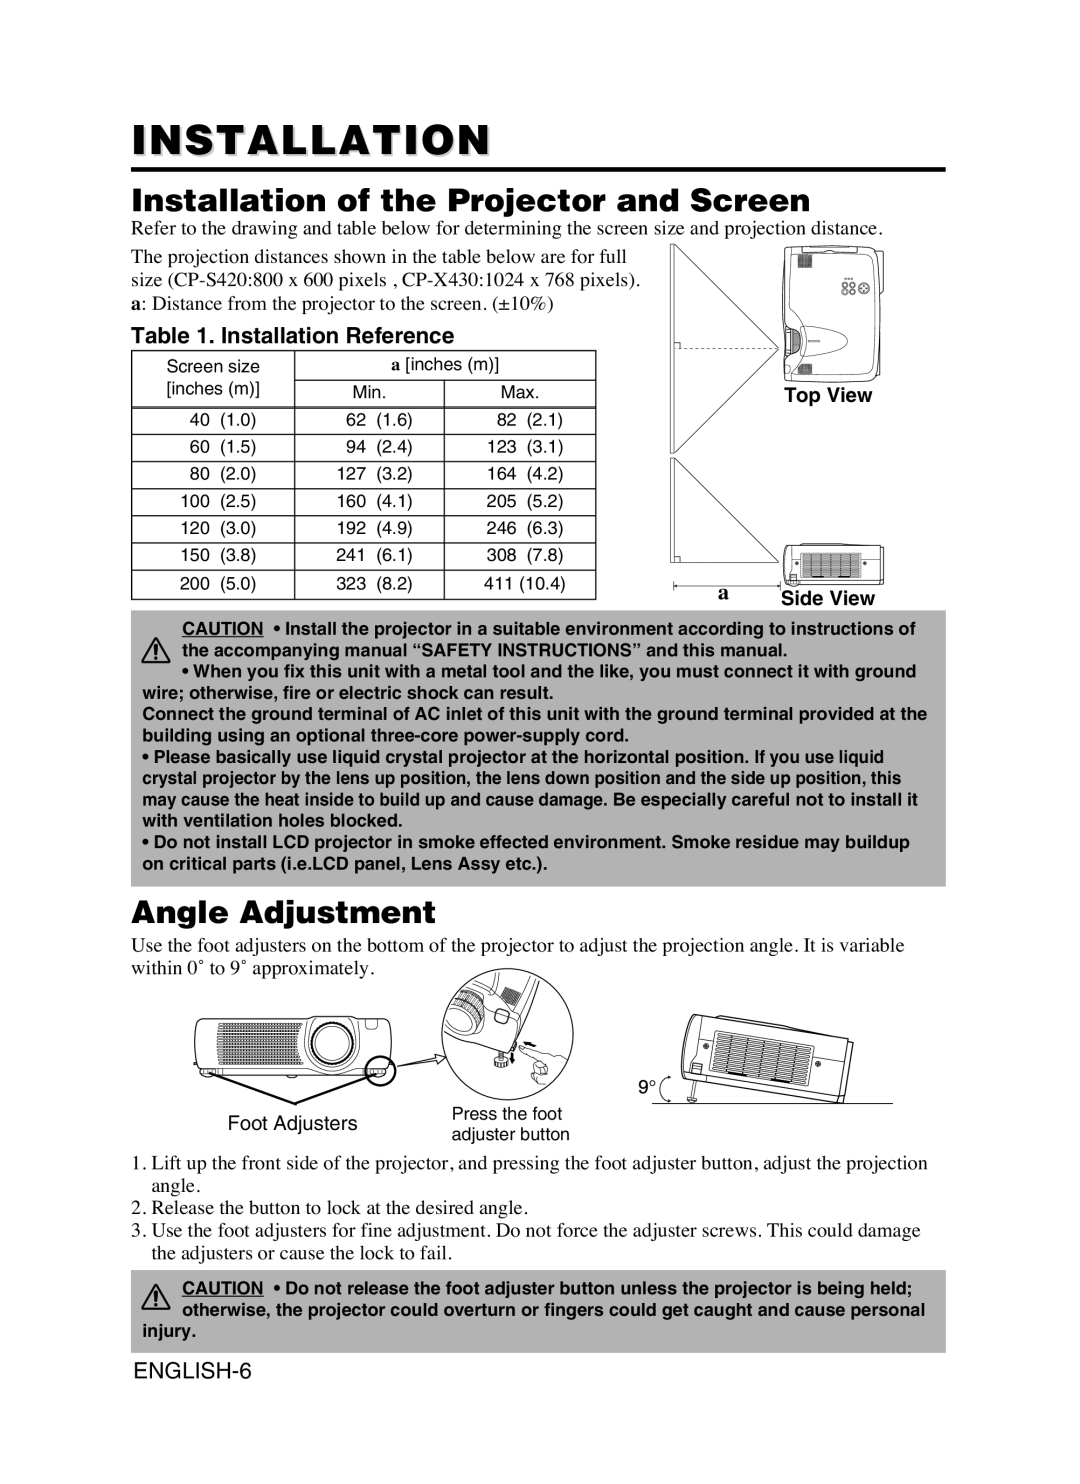 Dukane 8053 user manual Installation of the Projector and Screen, Angle Adjustment, Installation Reference 